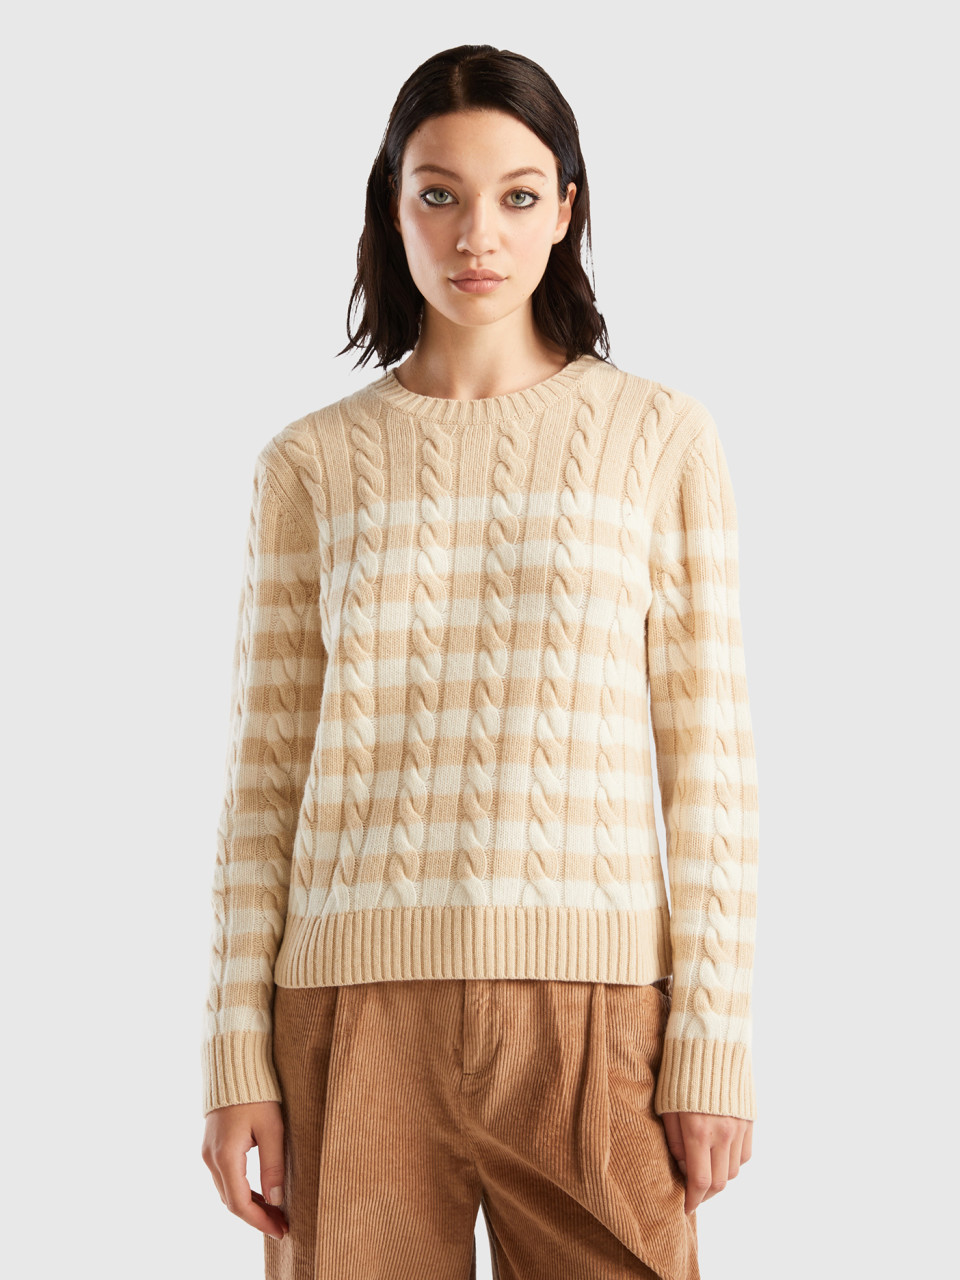 Benetton, Striped Sweater With Cables, Beige, Women